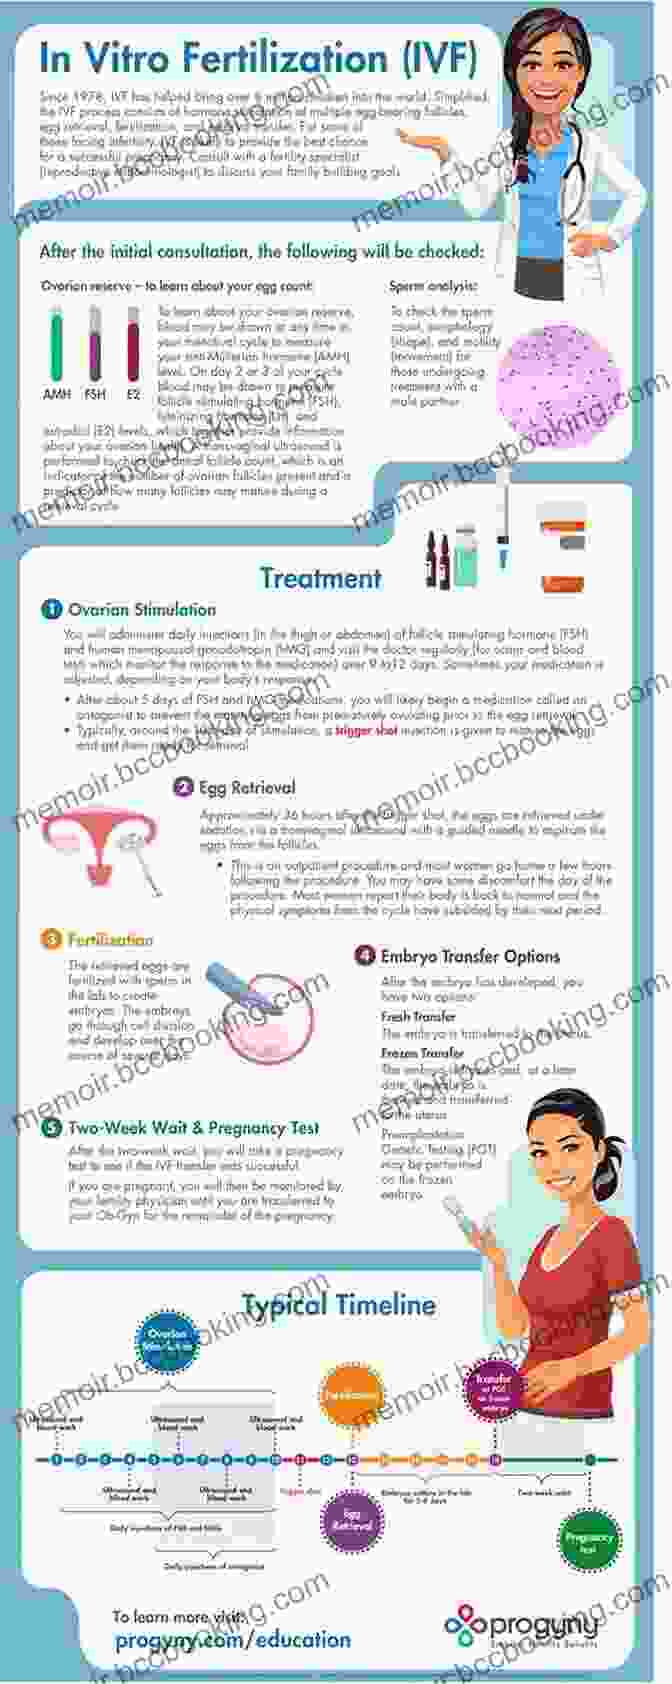 Infographic Displaying Various Fertility Treatments My Fertility Guide: How To Get Pregnant Naturally